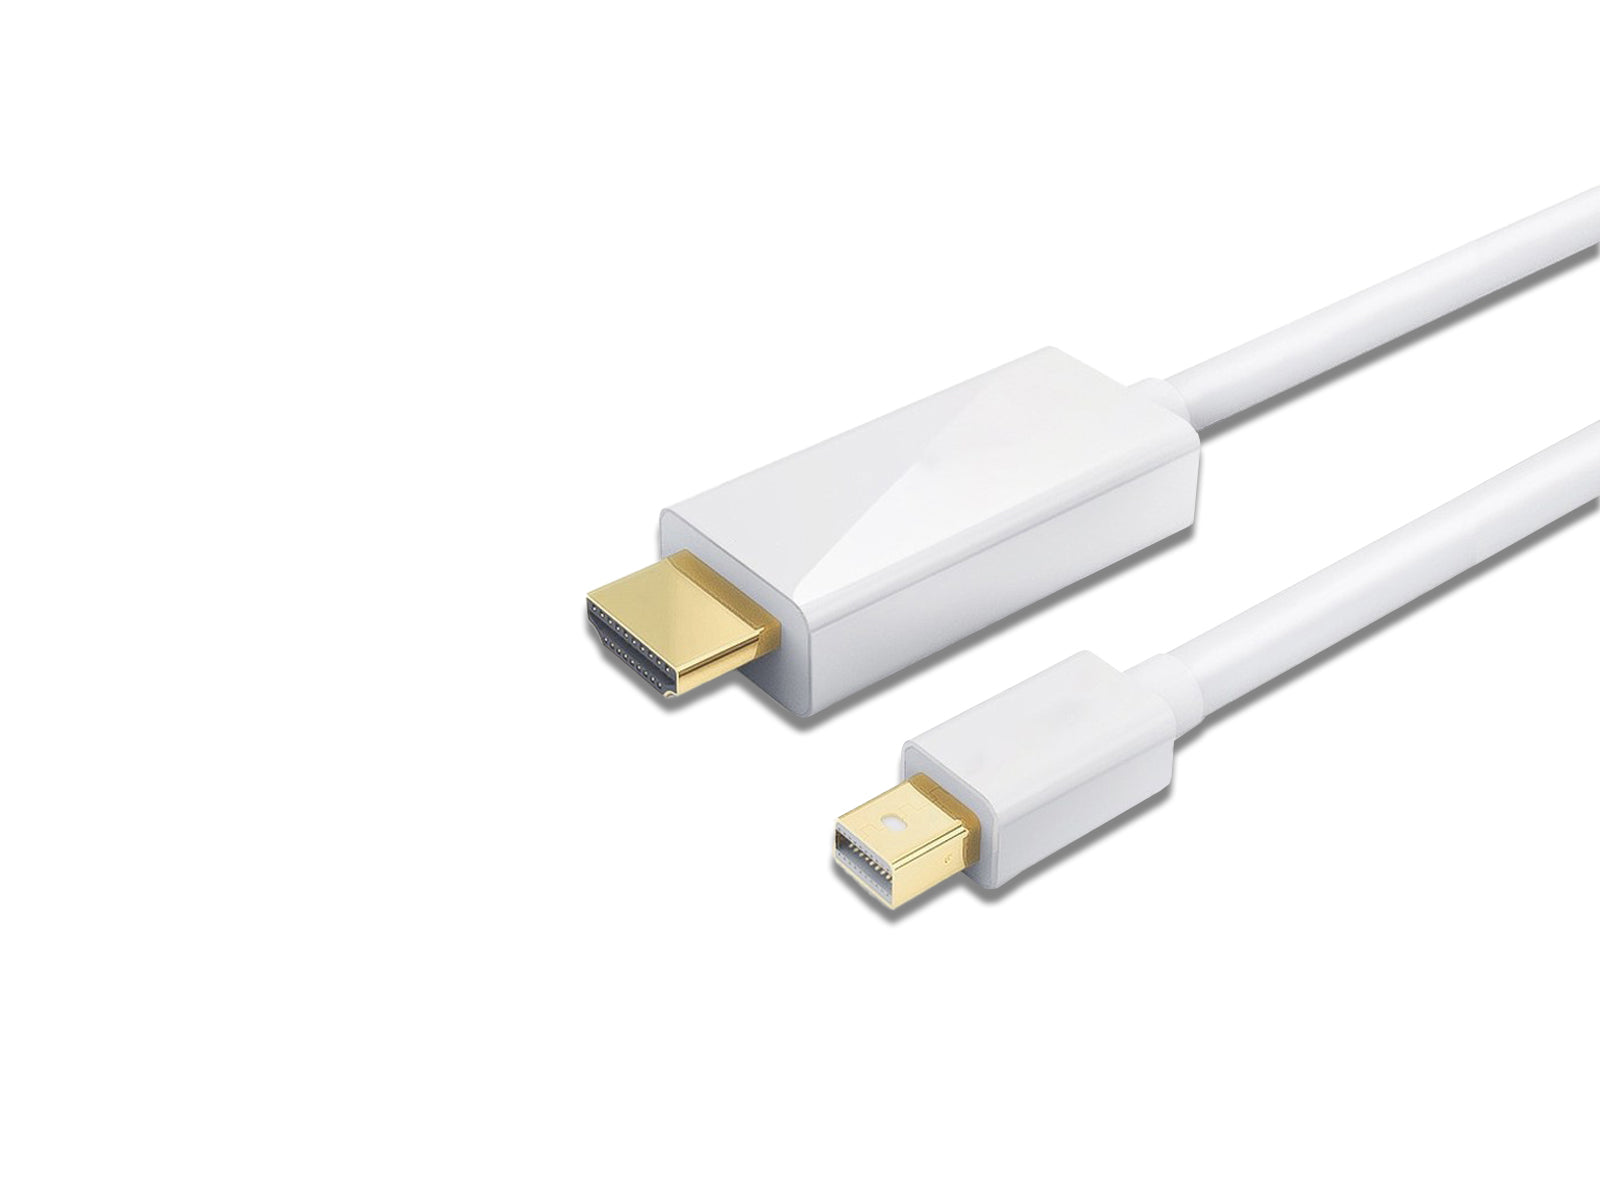 Mini DisplayPort to HDMI Cable Showing Both Connectors